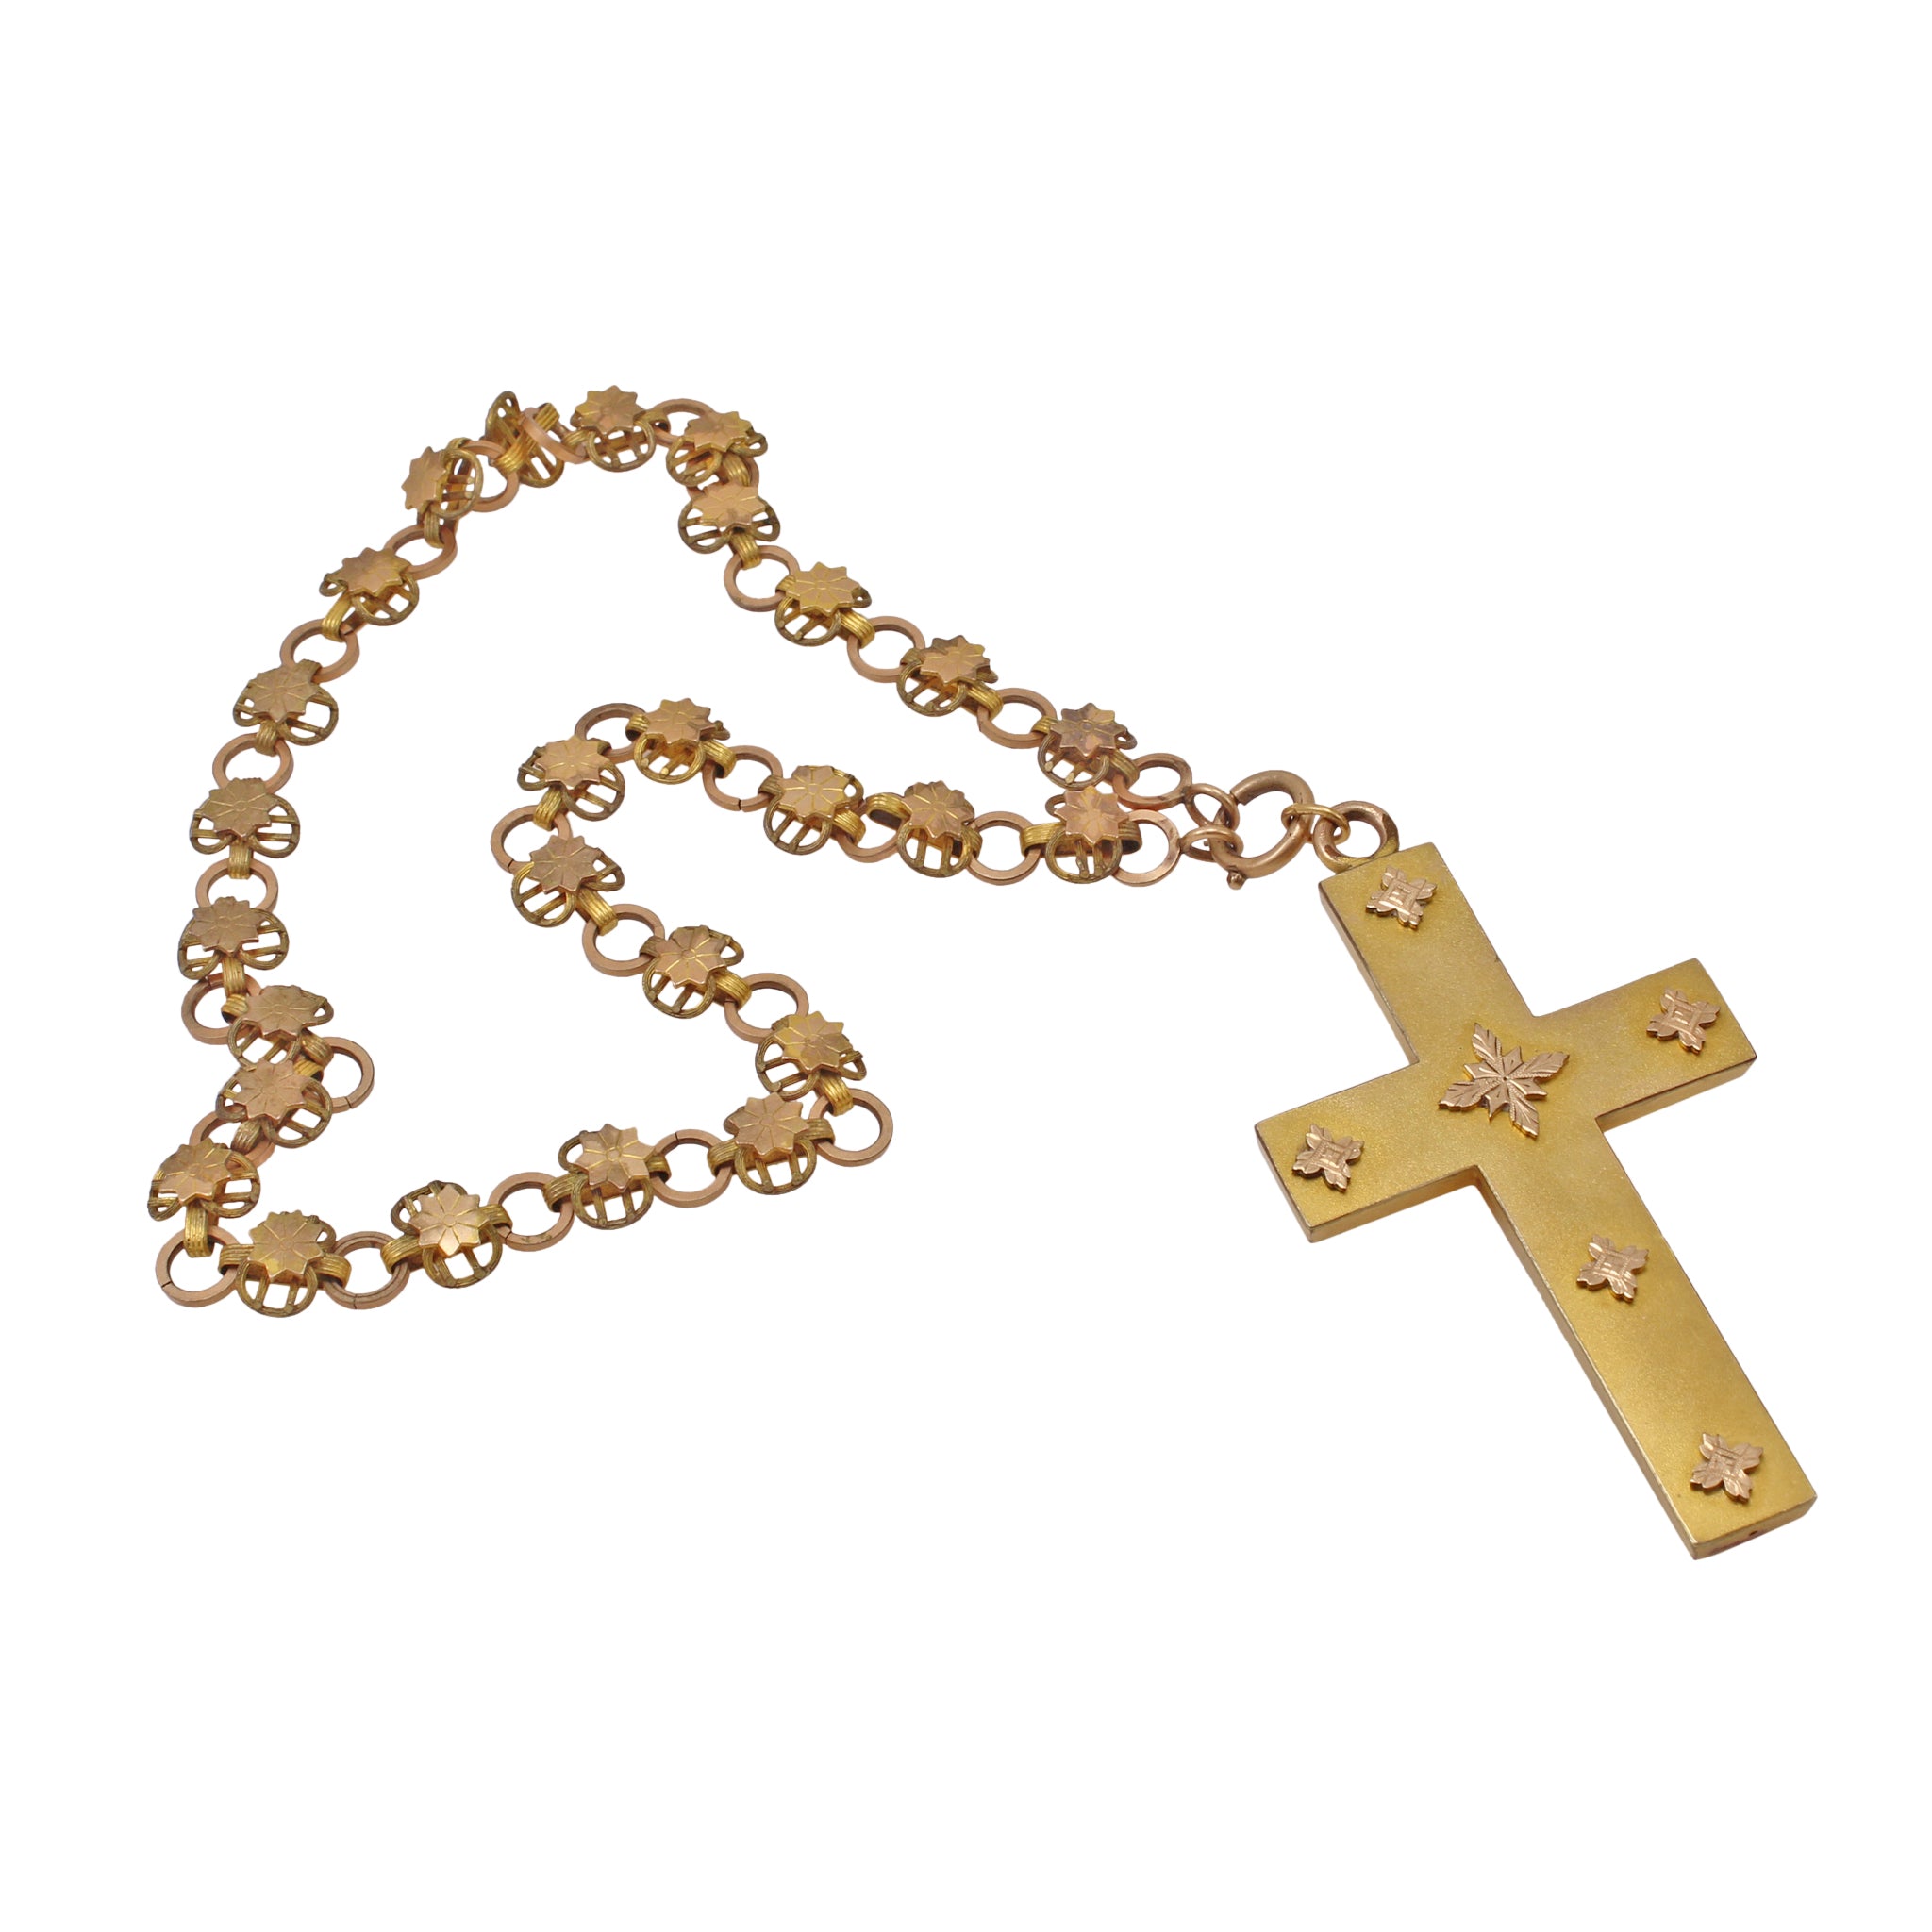 Victorian Large Cross Pendant/Pin with Chain Front